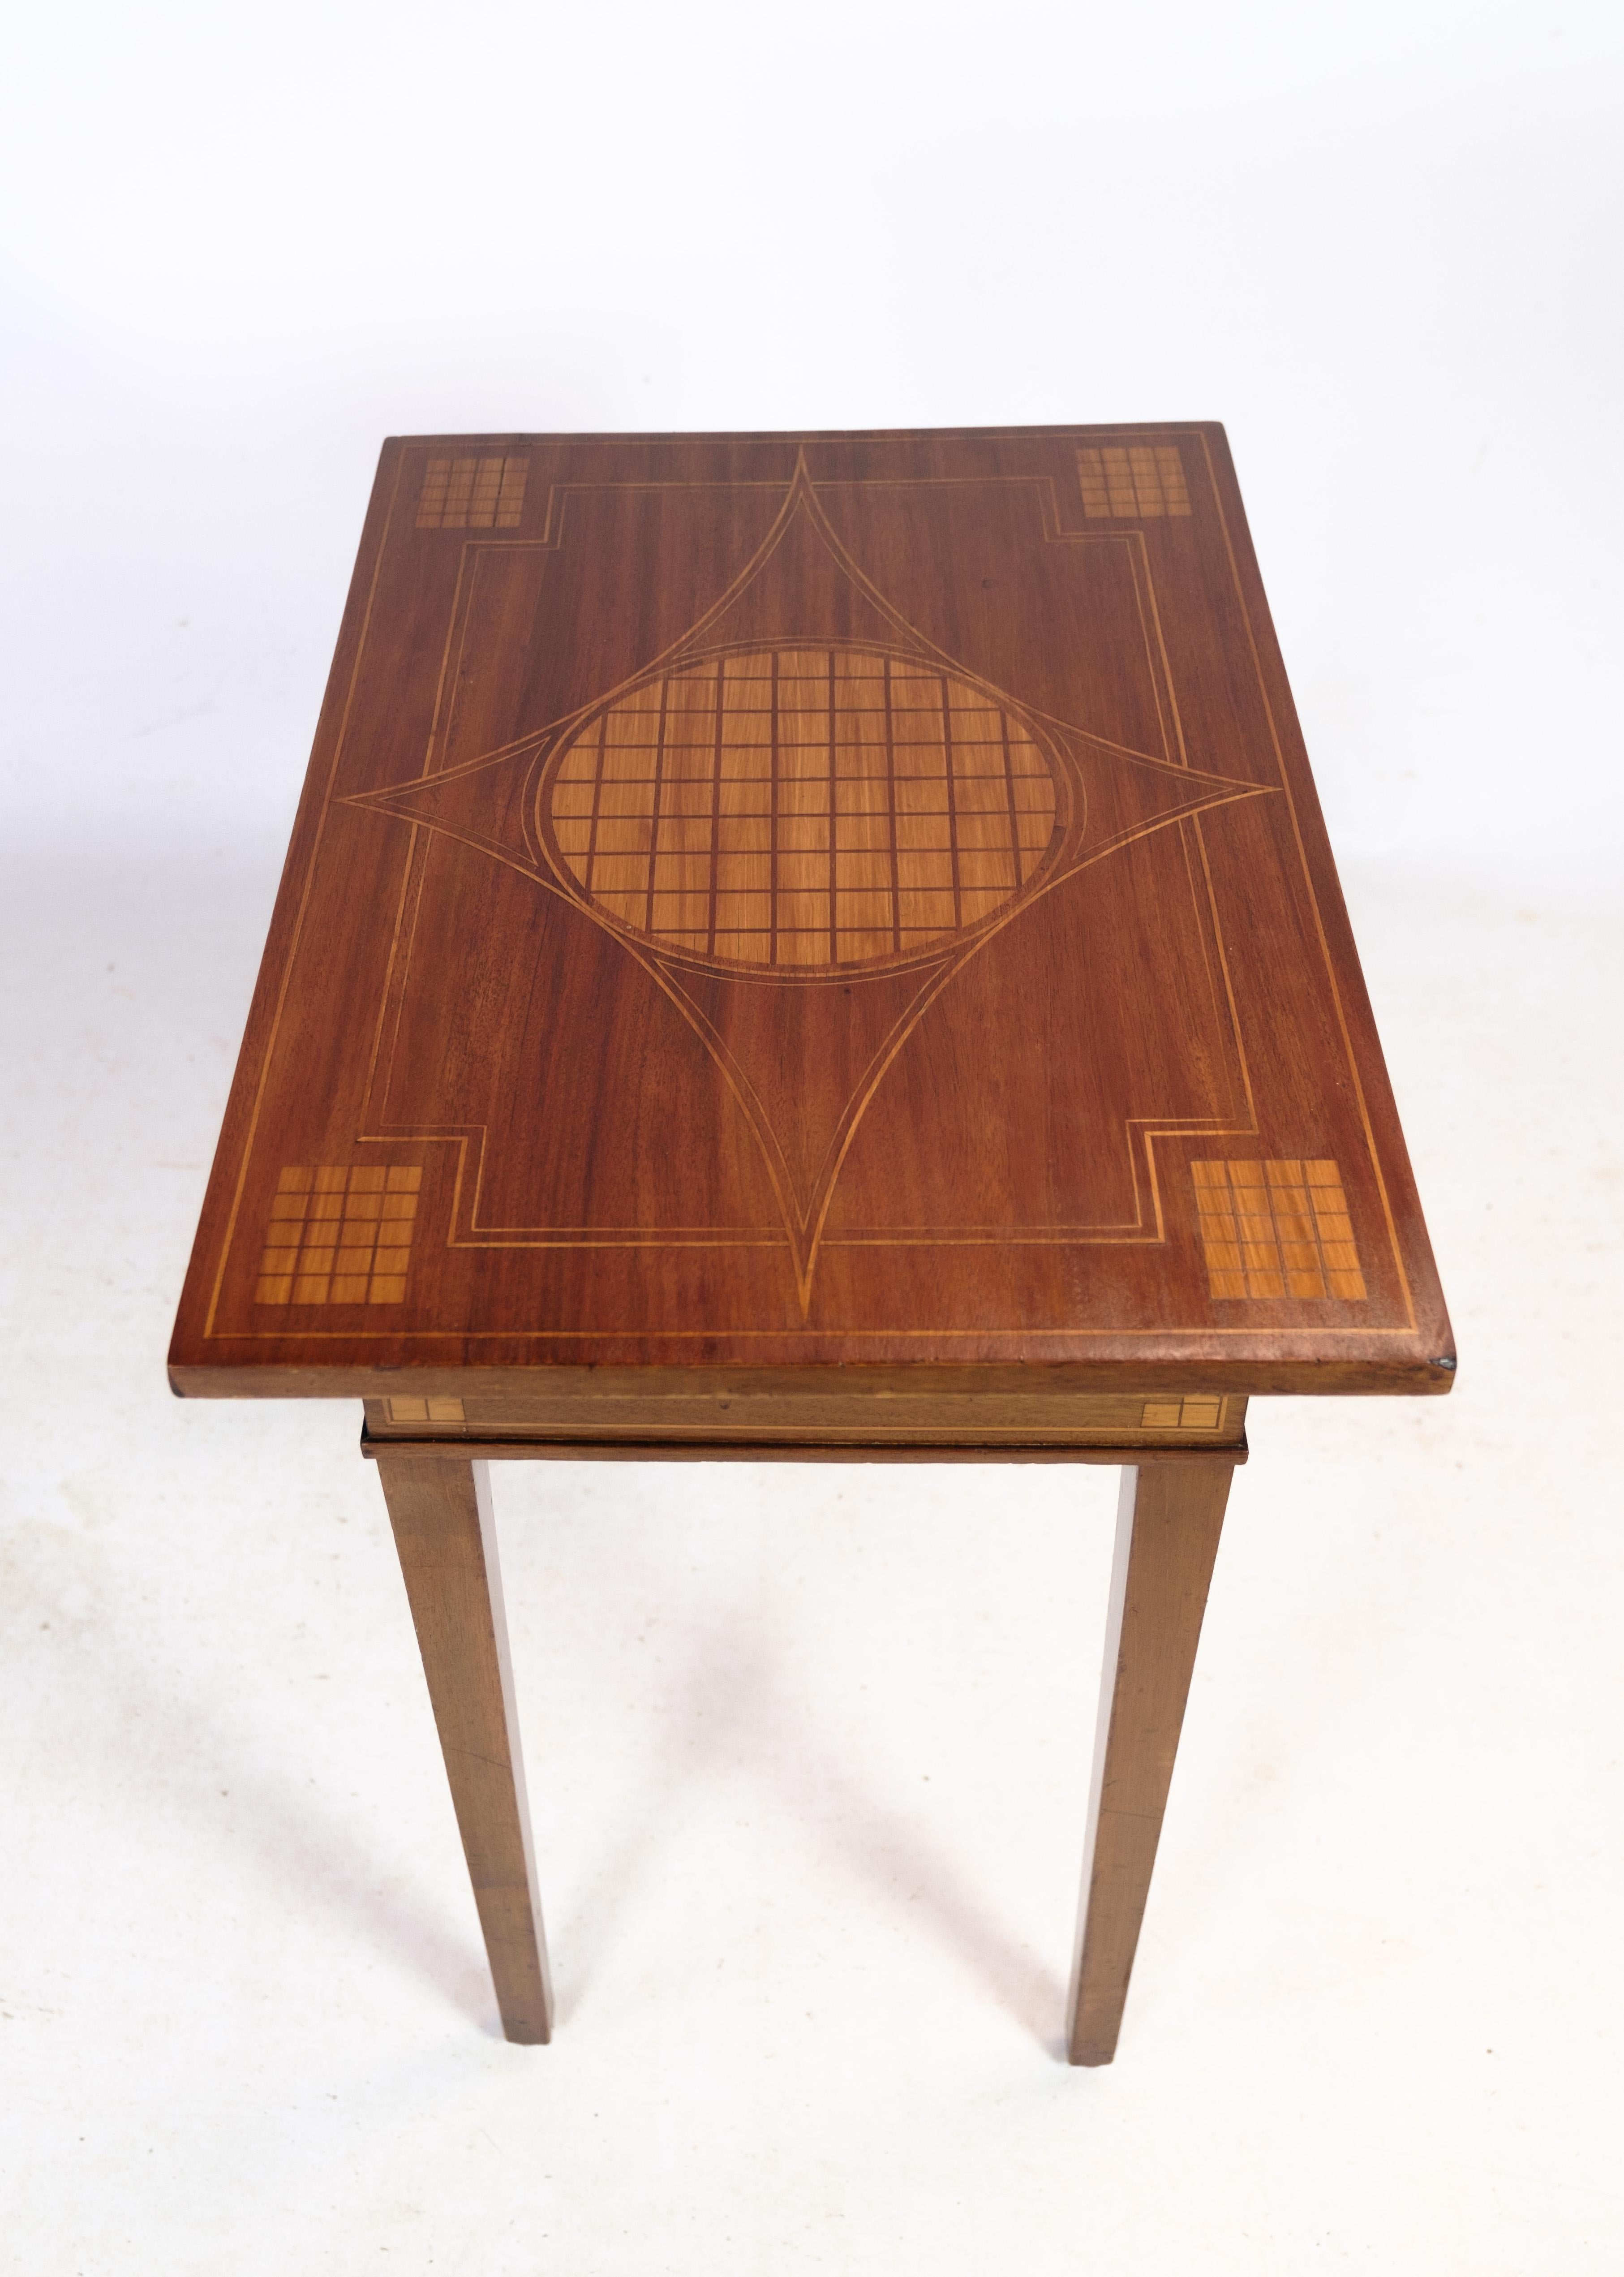 Mahogany side table with decoration in the form of walnut marquetry on both table top and legs from around the 1920s.
Measurements in cm: H:66.5 W:63 D:44.5.